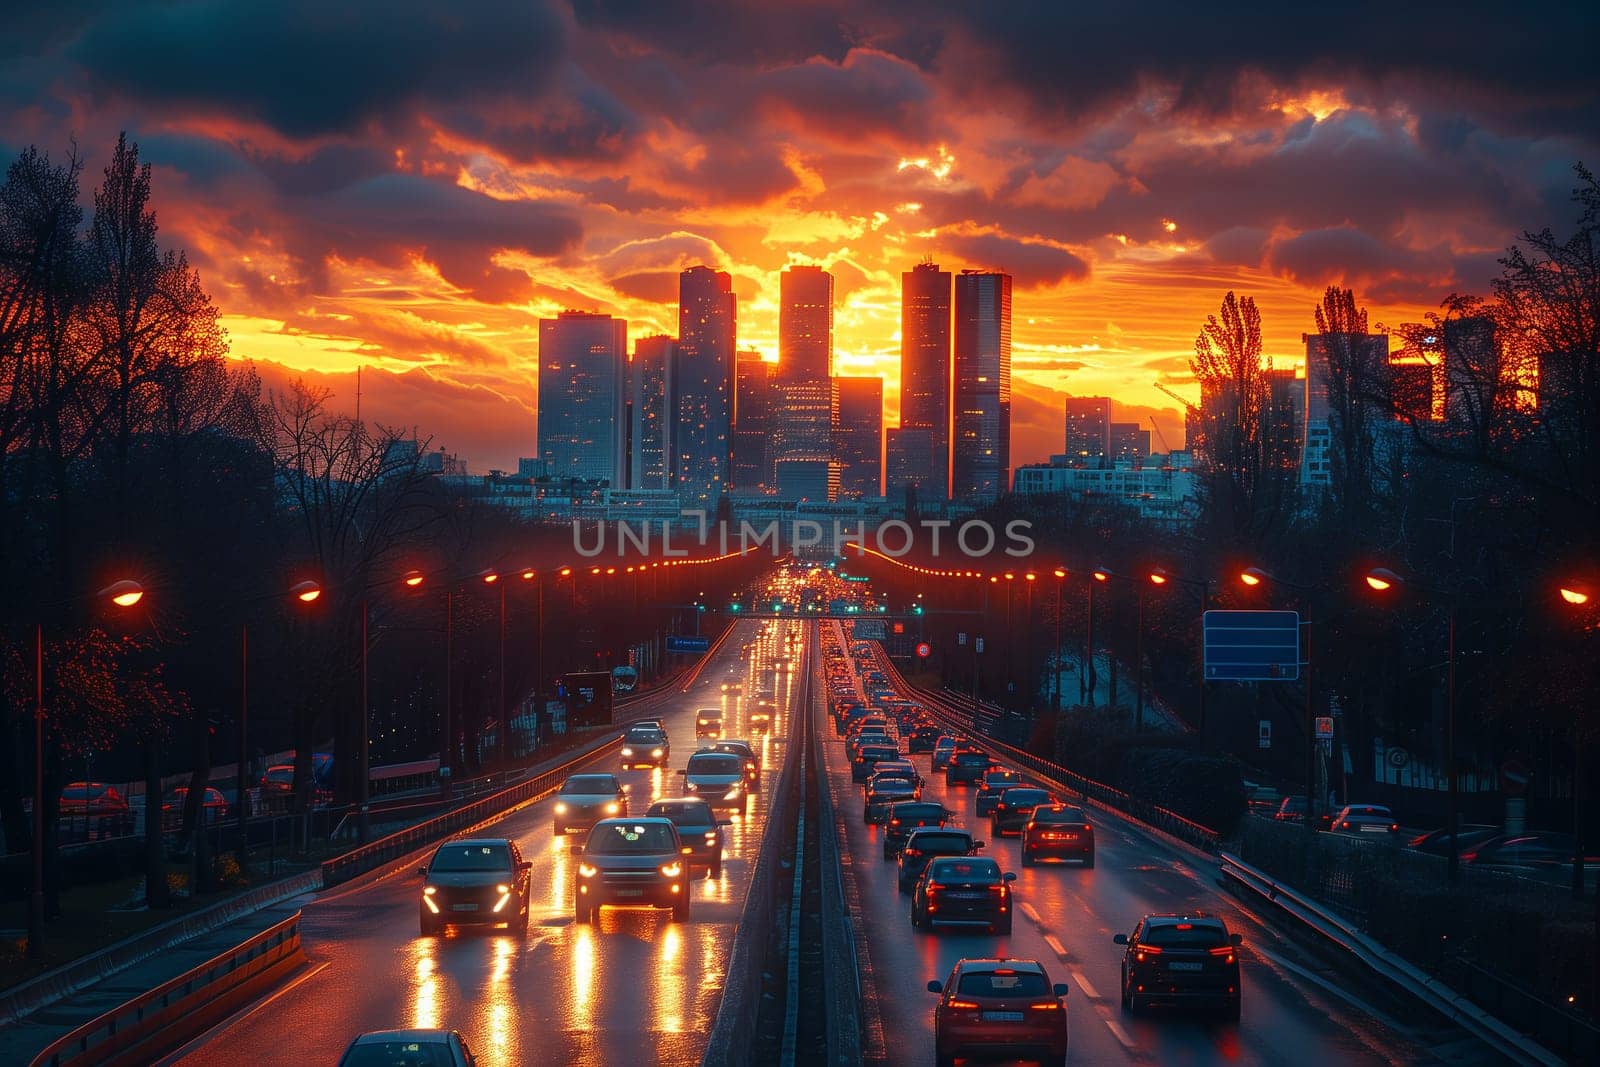 Sunset cityscape with skyscrapers, busy highway, and clouds in the sky by richwolf